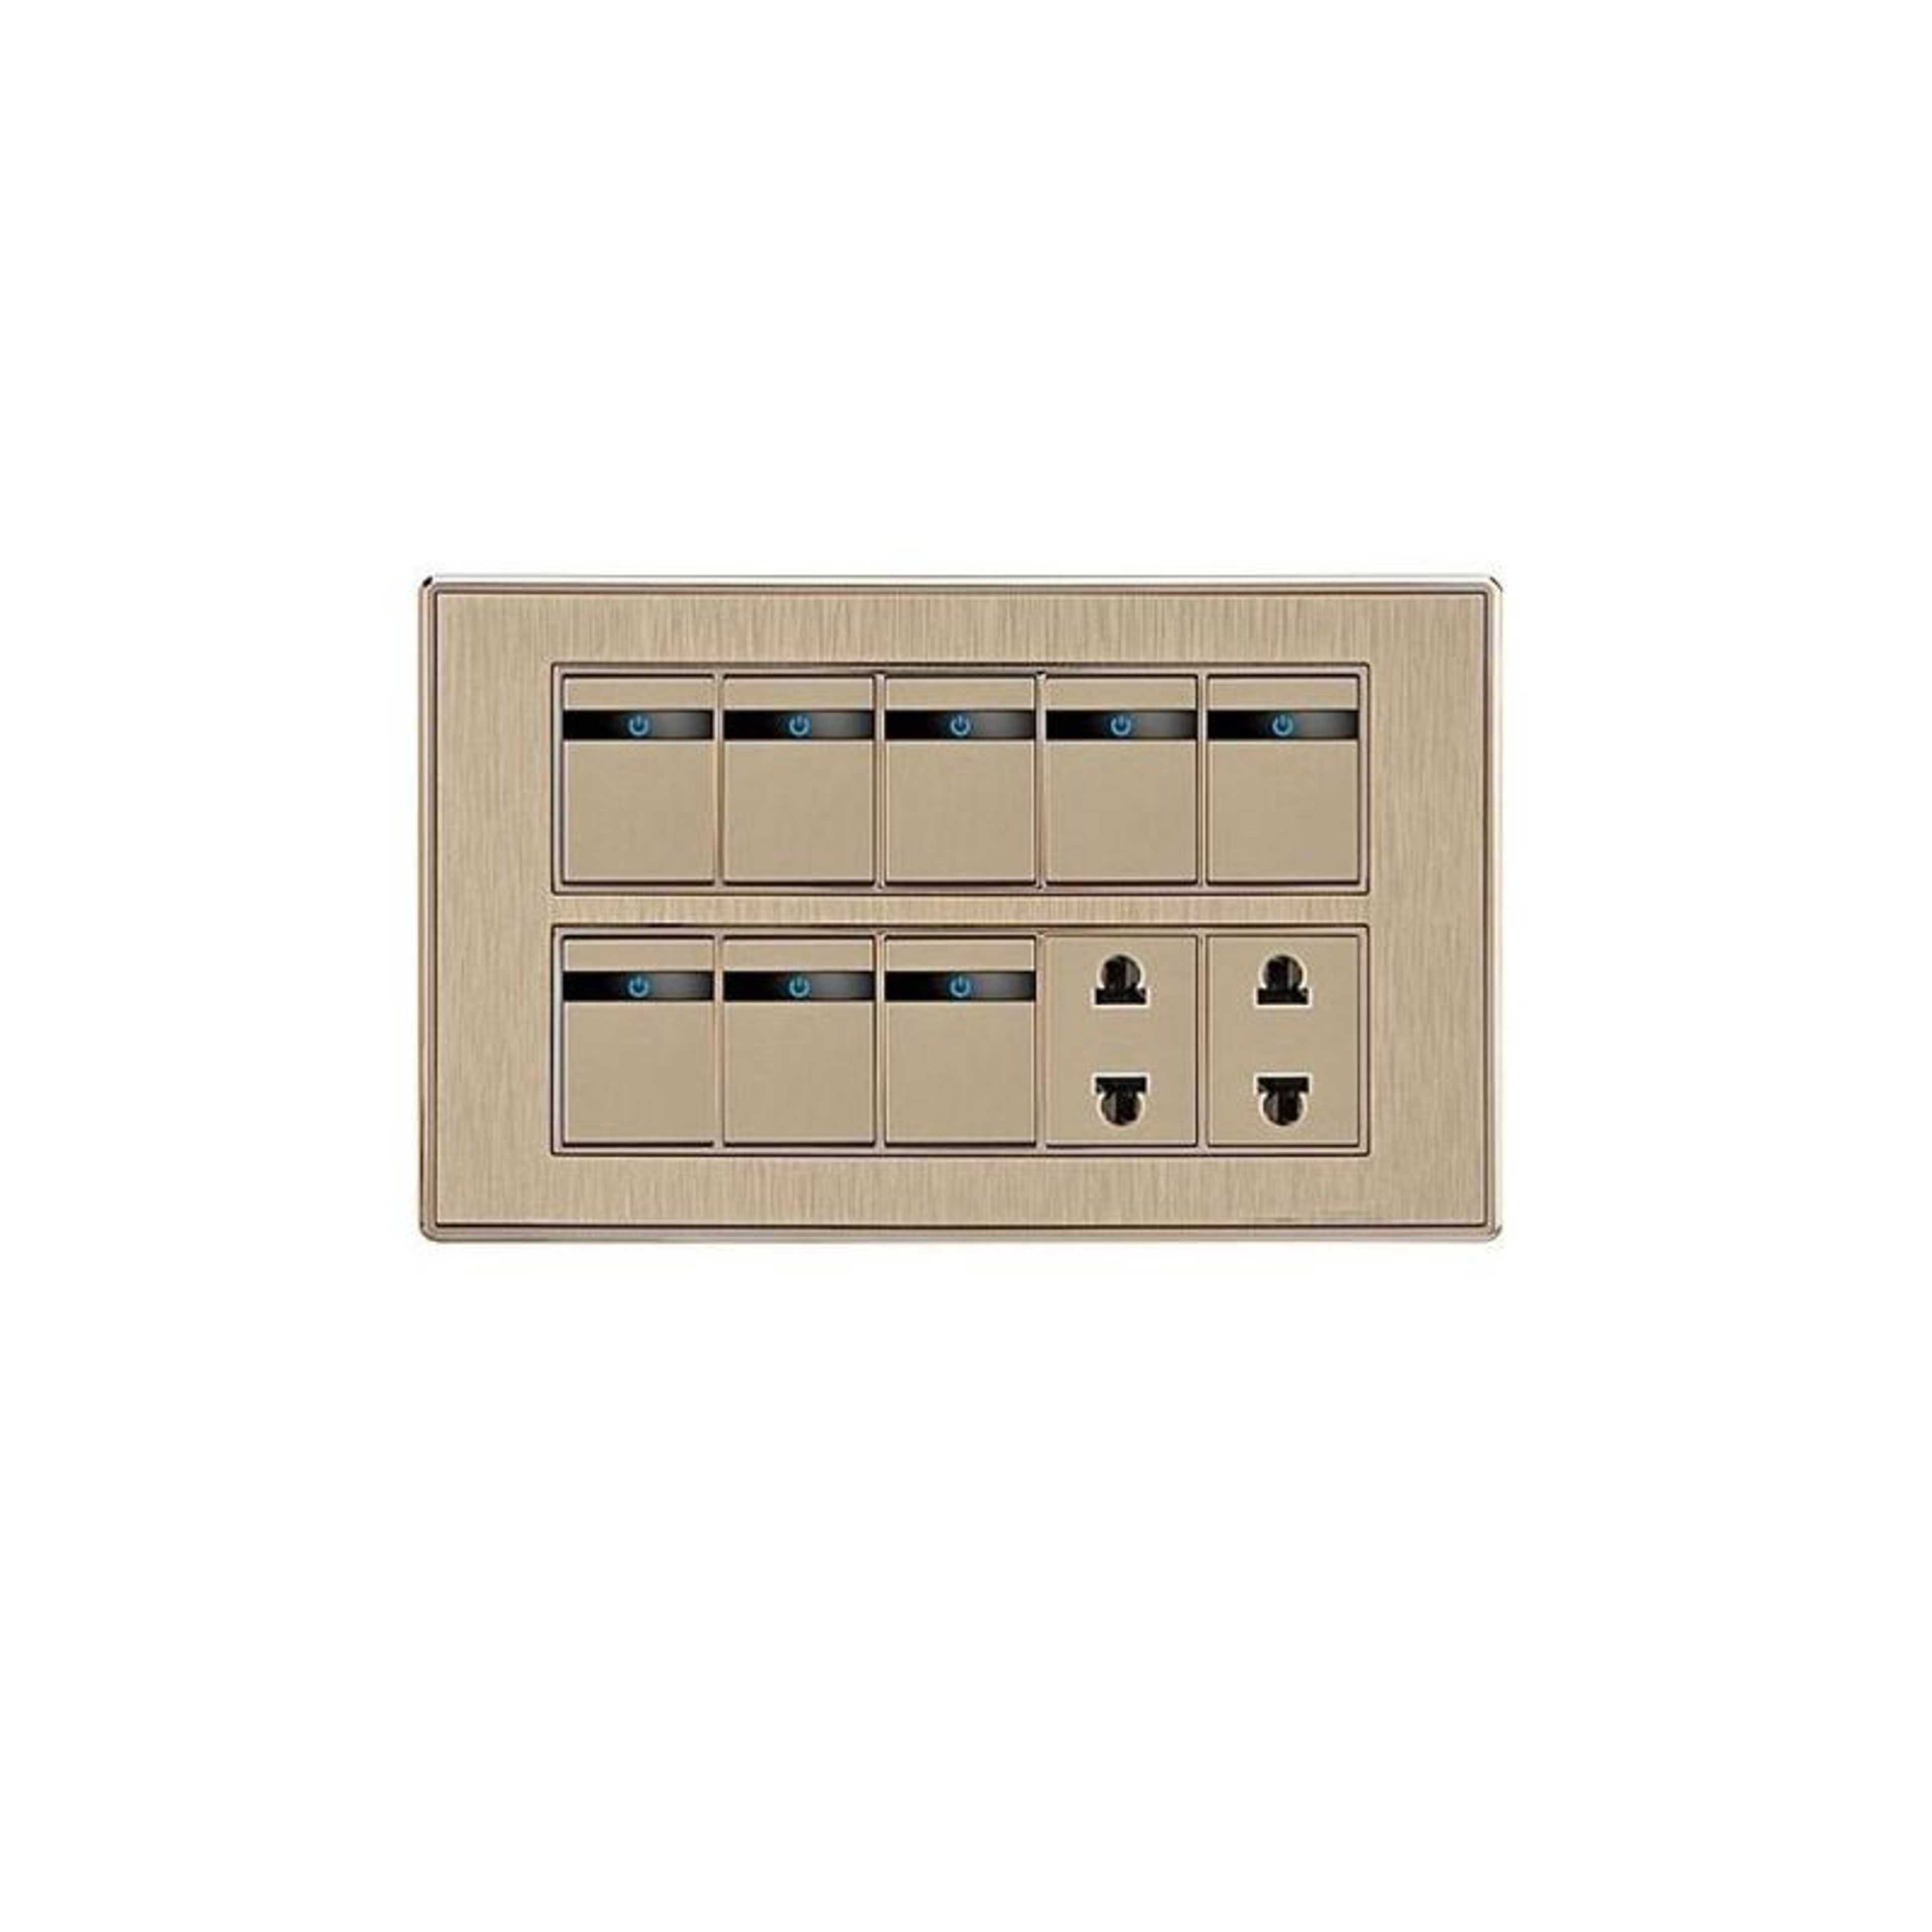 China Fitting Switch & Sockets (8 Buttons and 2 Socket)